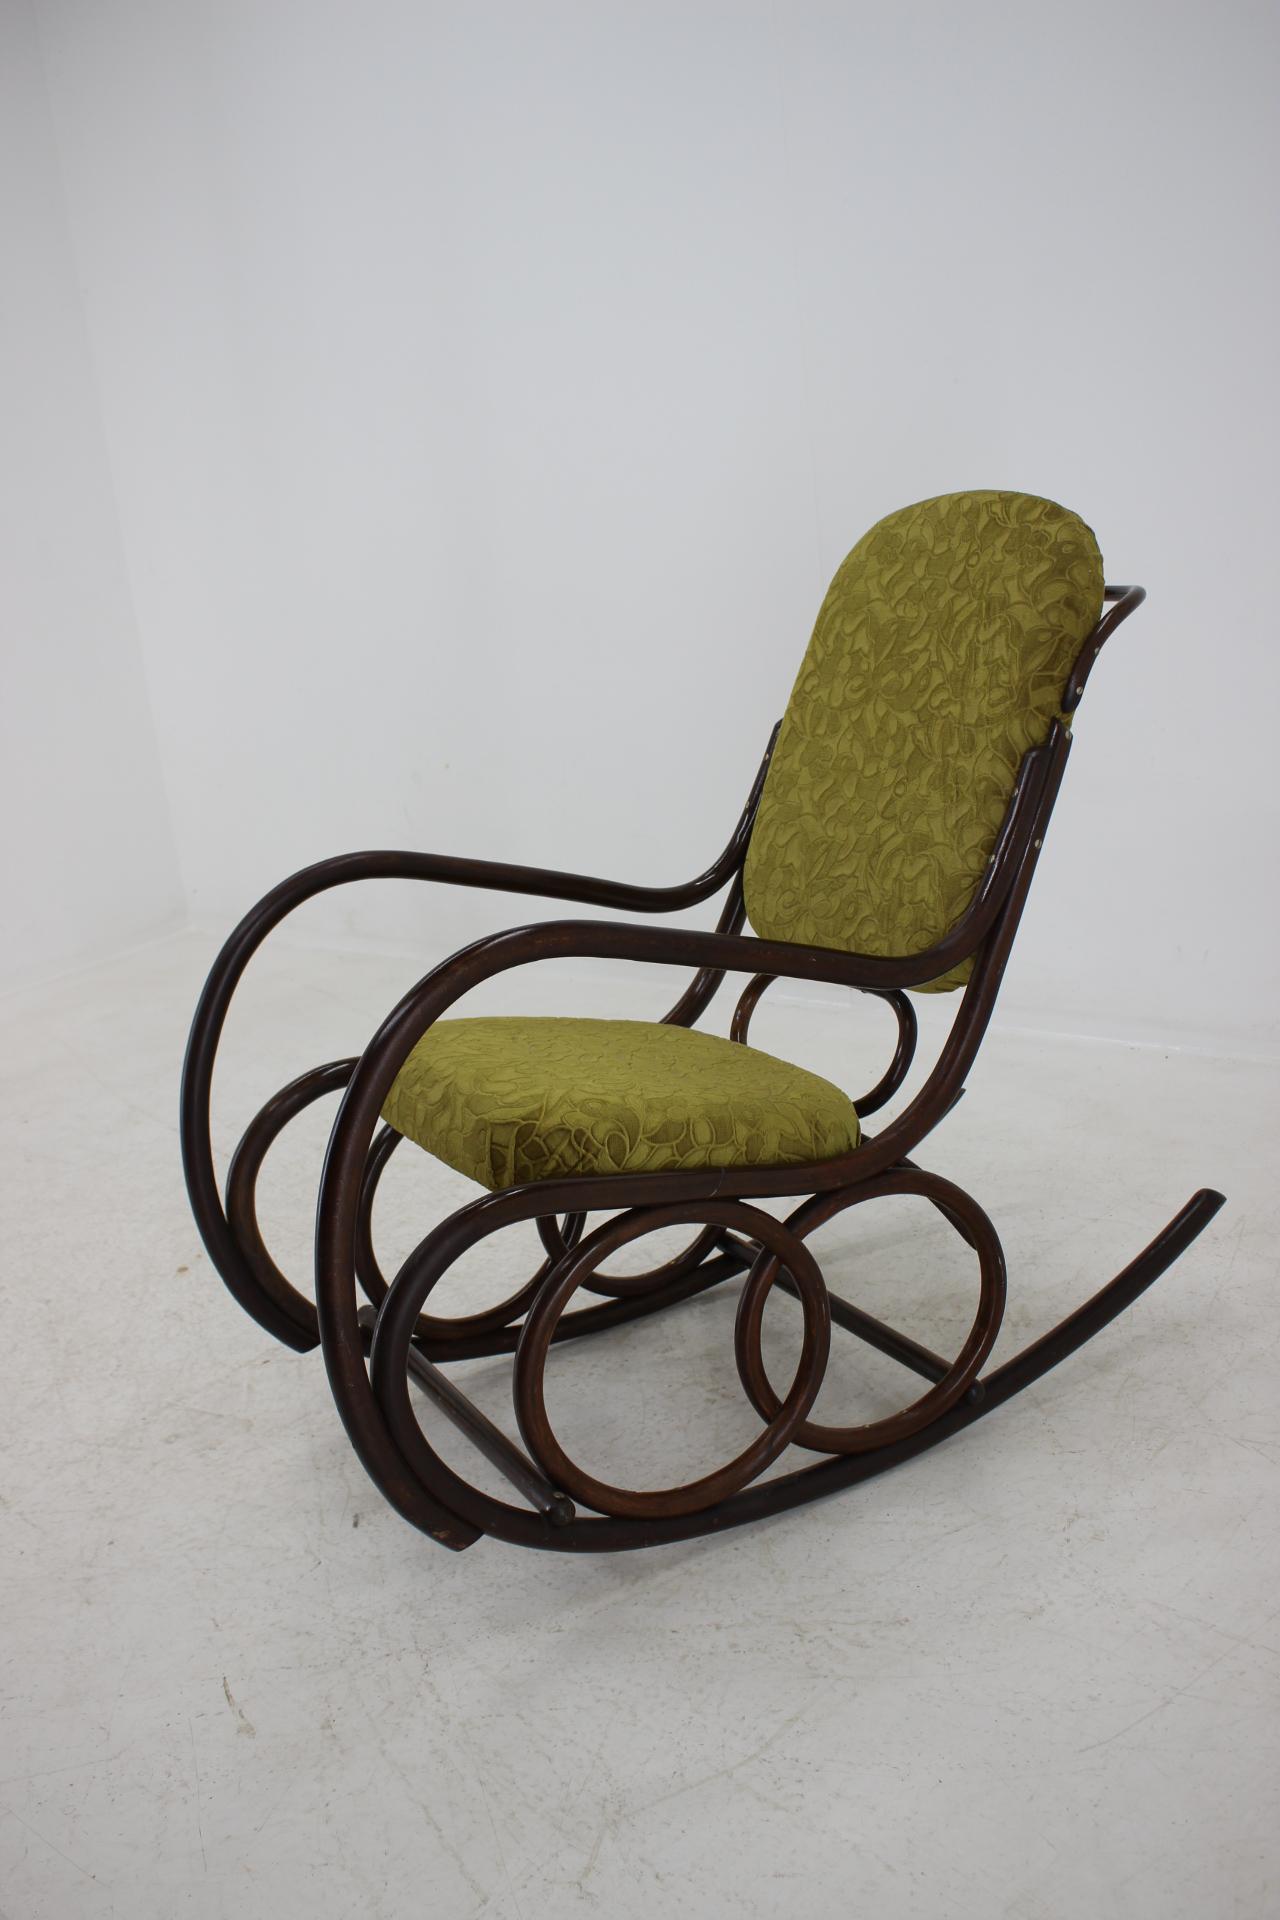 Midcentury rocking chair made of blond beech bentwood by TON from 1960s. Very good original condition.